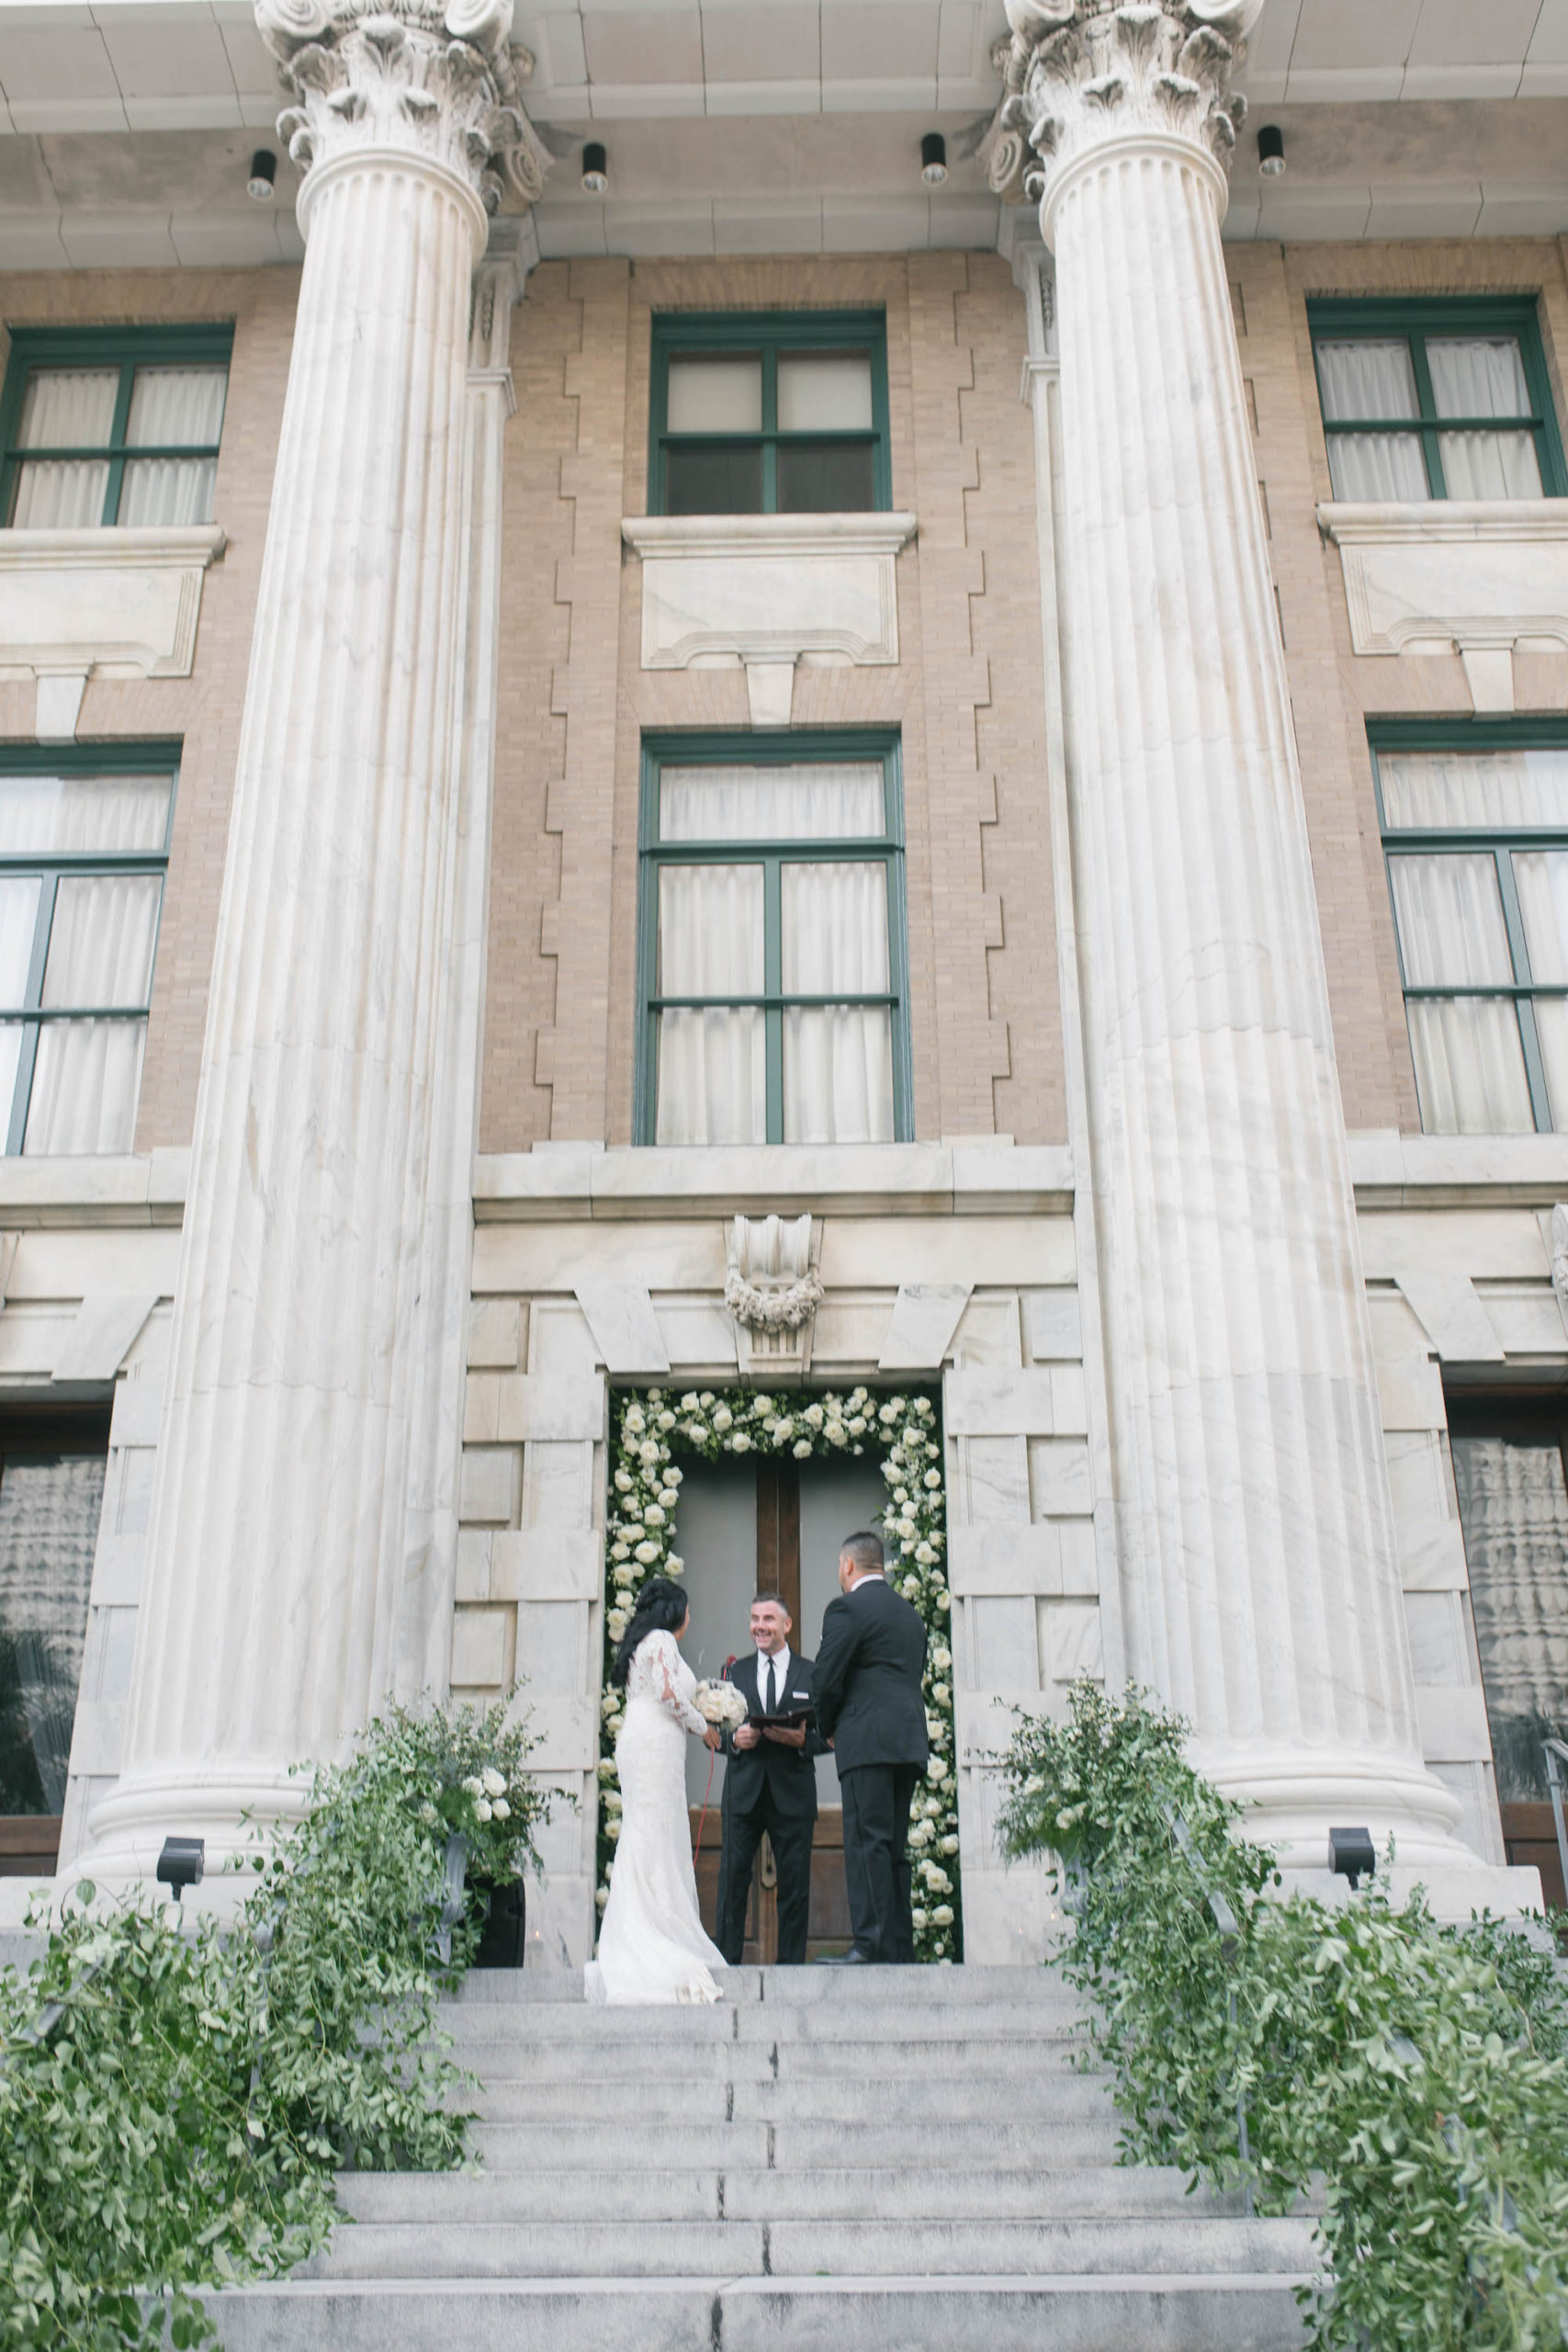 Florida Bride and Groom Exchanging Vows on Steps of Tampa Historic Courthouse Boutique Hotel Wedding Venue Le Meridien, Greenery Decor on Steps, White Roses Doorway Arch | Wedding Planner Parties A'la Carte